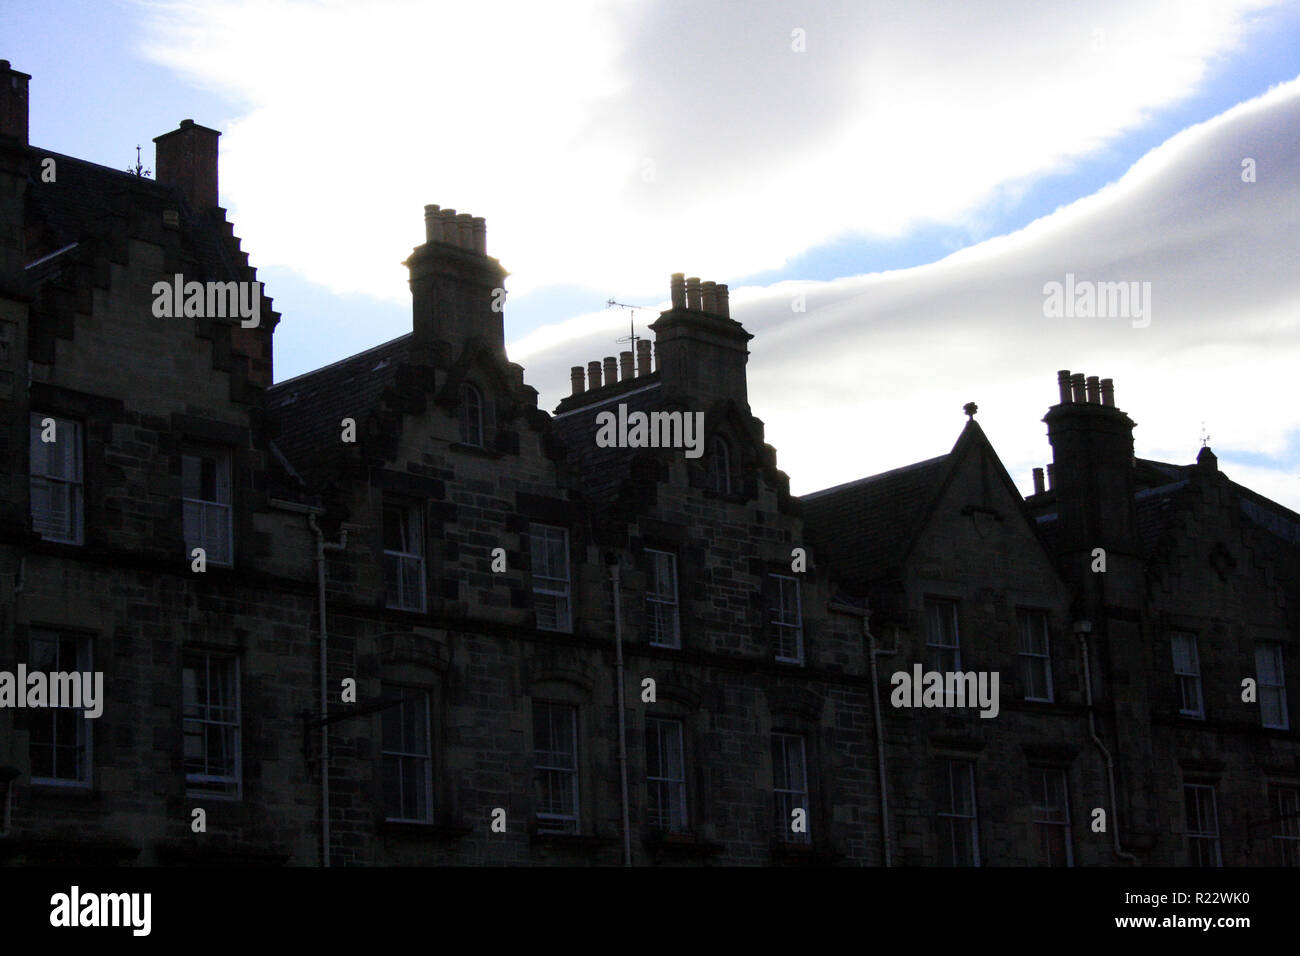 Chimney pipes silhouetted against a cloudy sky, Edinburgh, Scotland Stock Photo